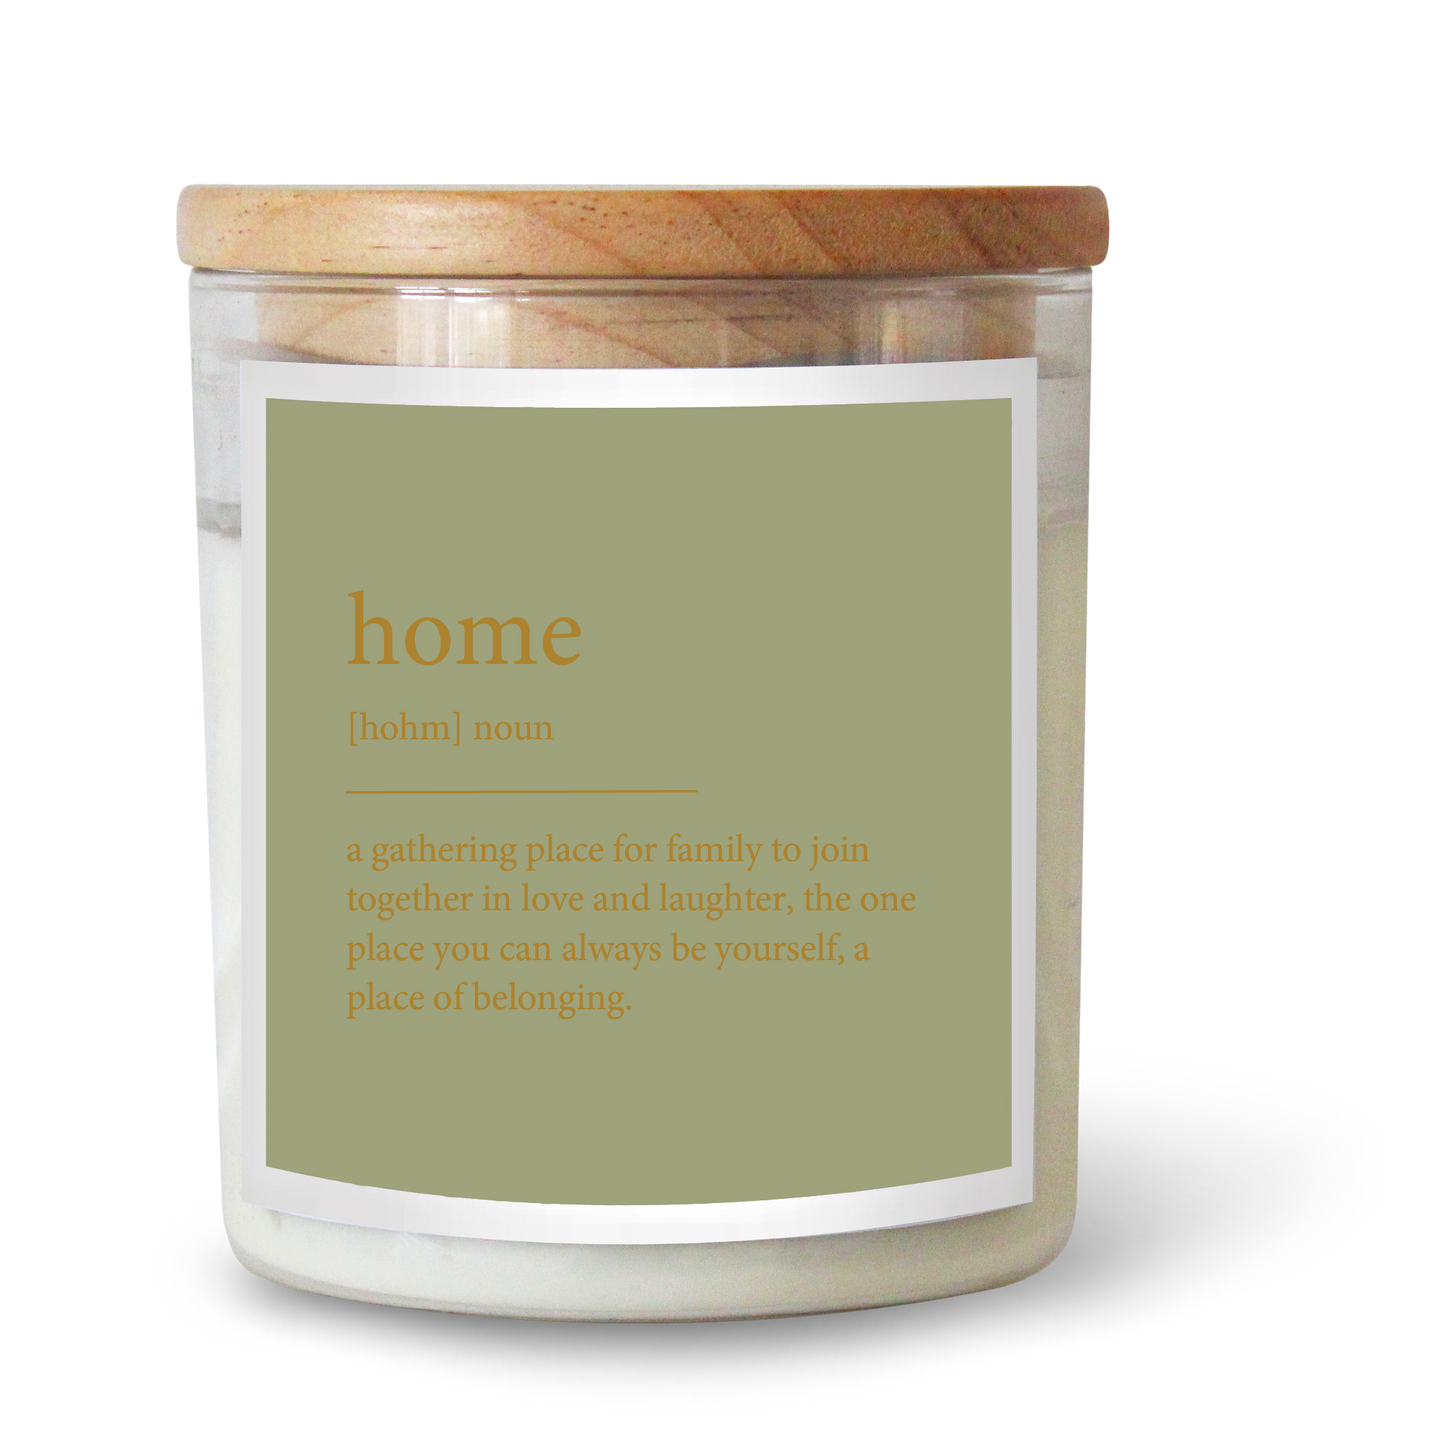 FOIL BIG Dictionary Meaning Home Candle